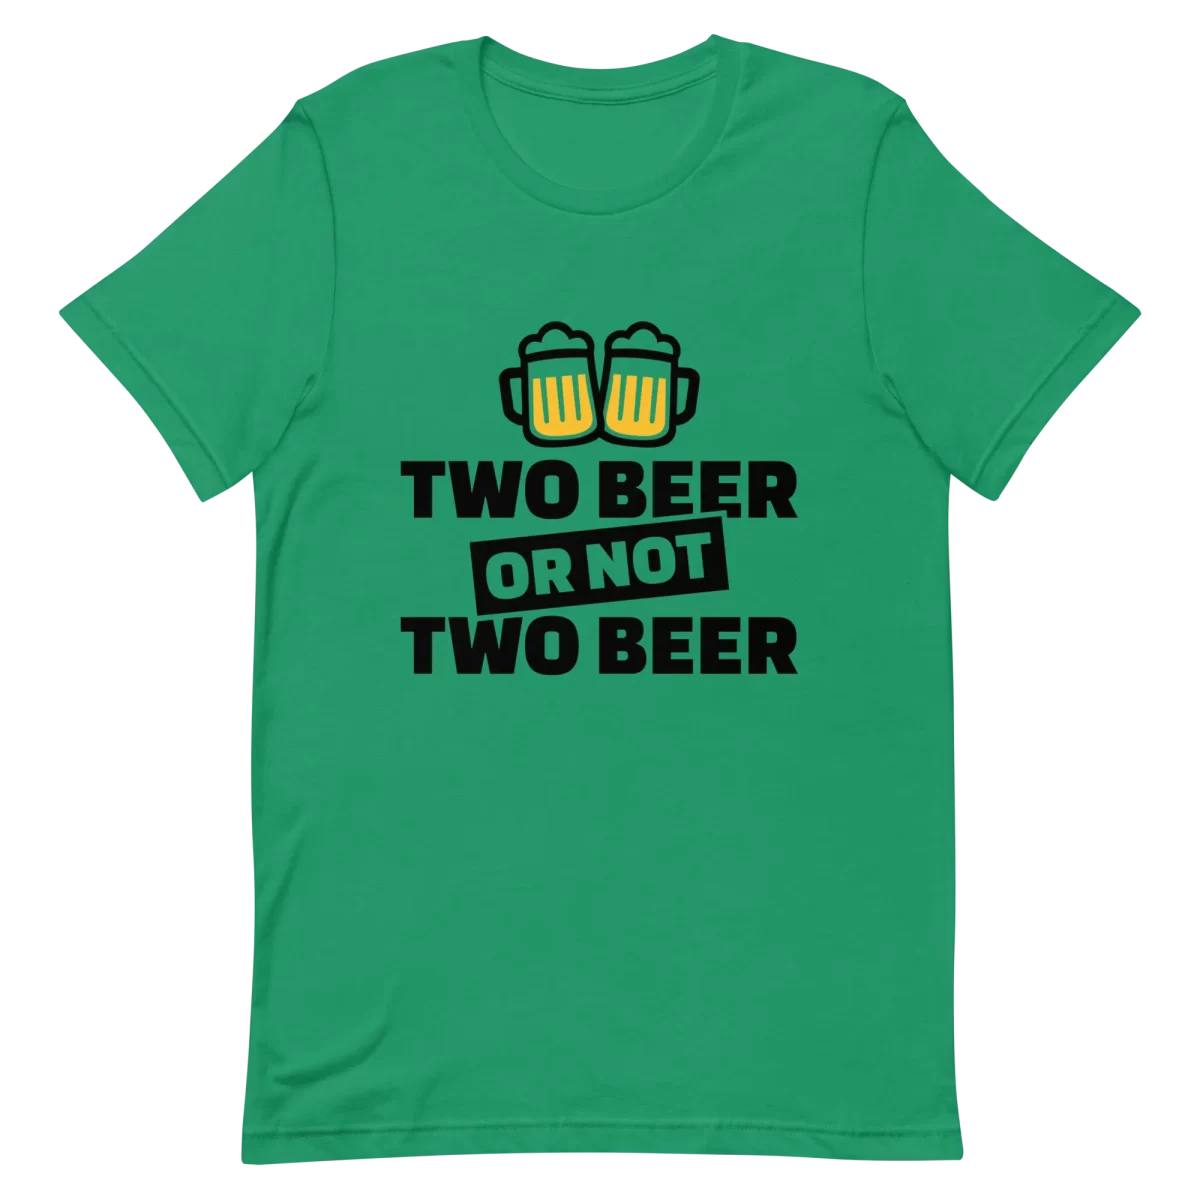 Unisex T-Shirt - Two Beer or Not to Beer - Kelly